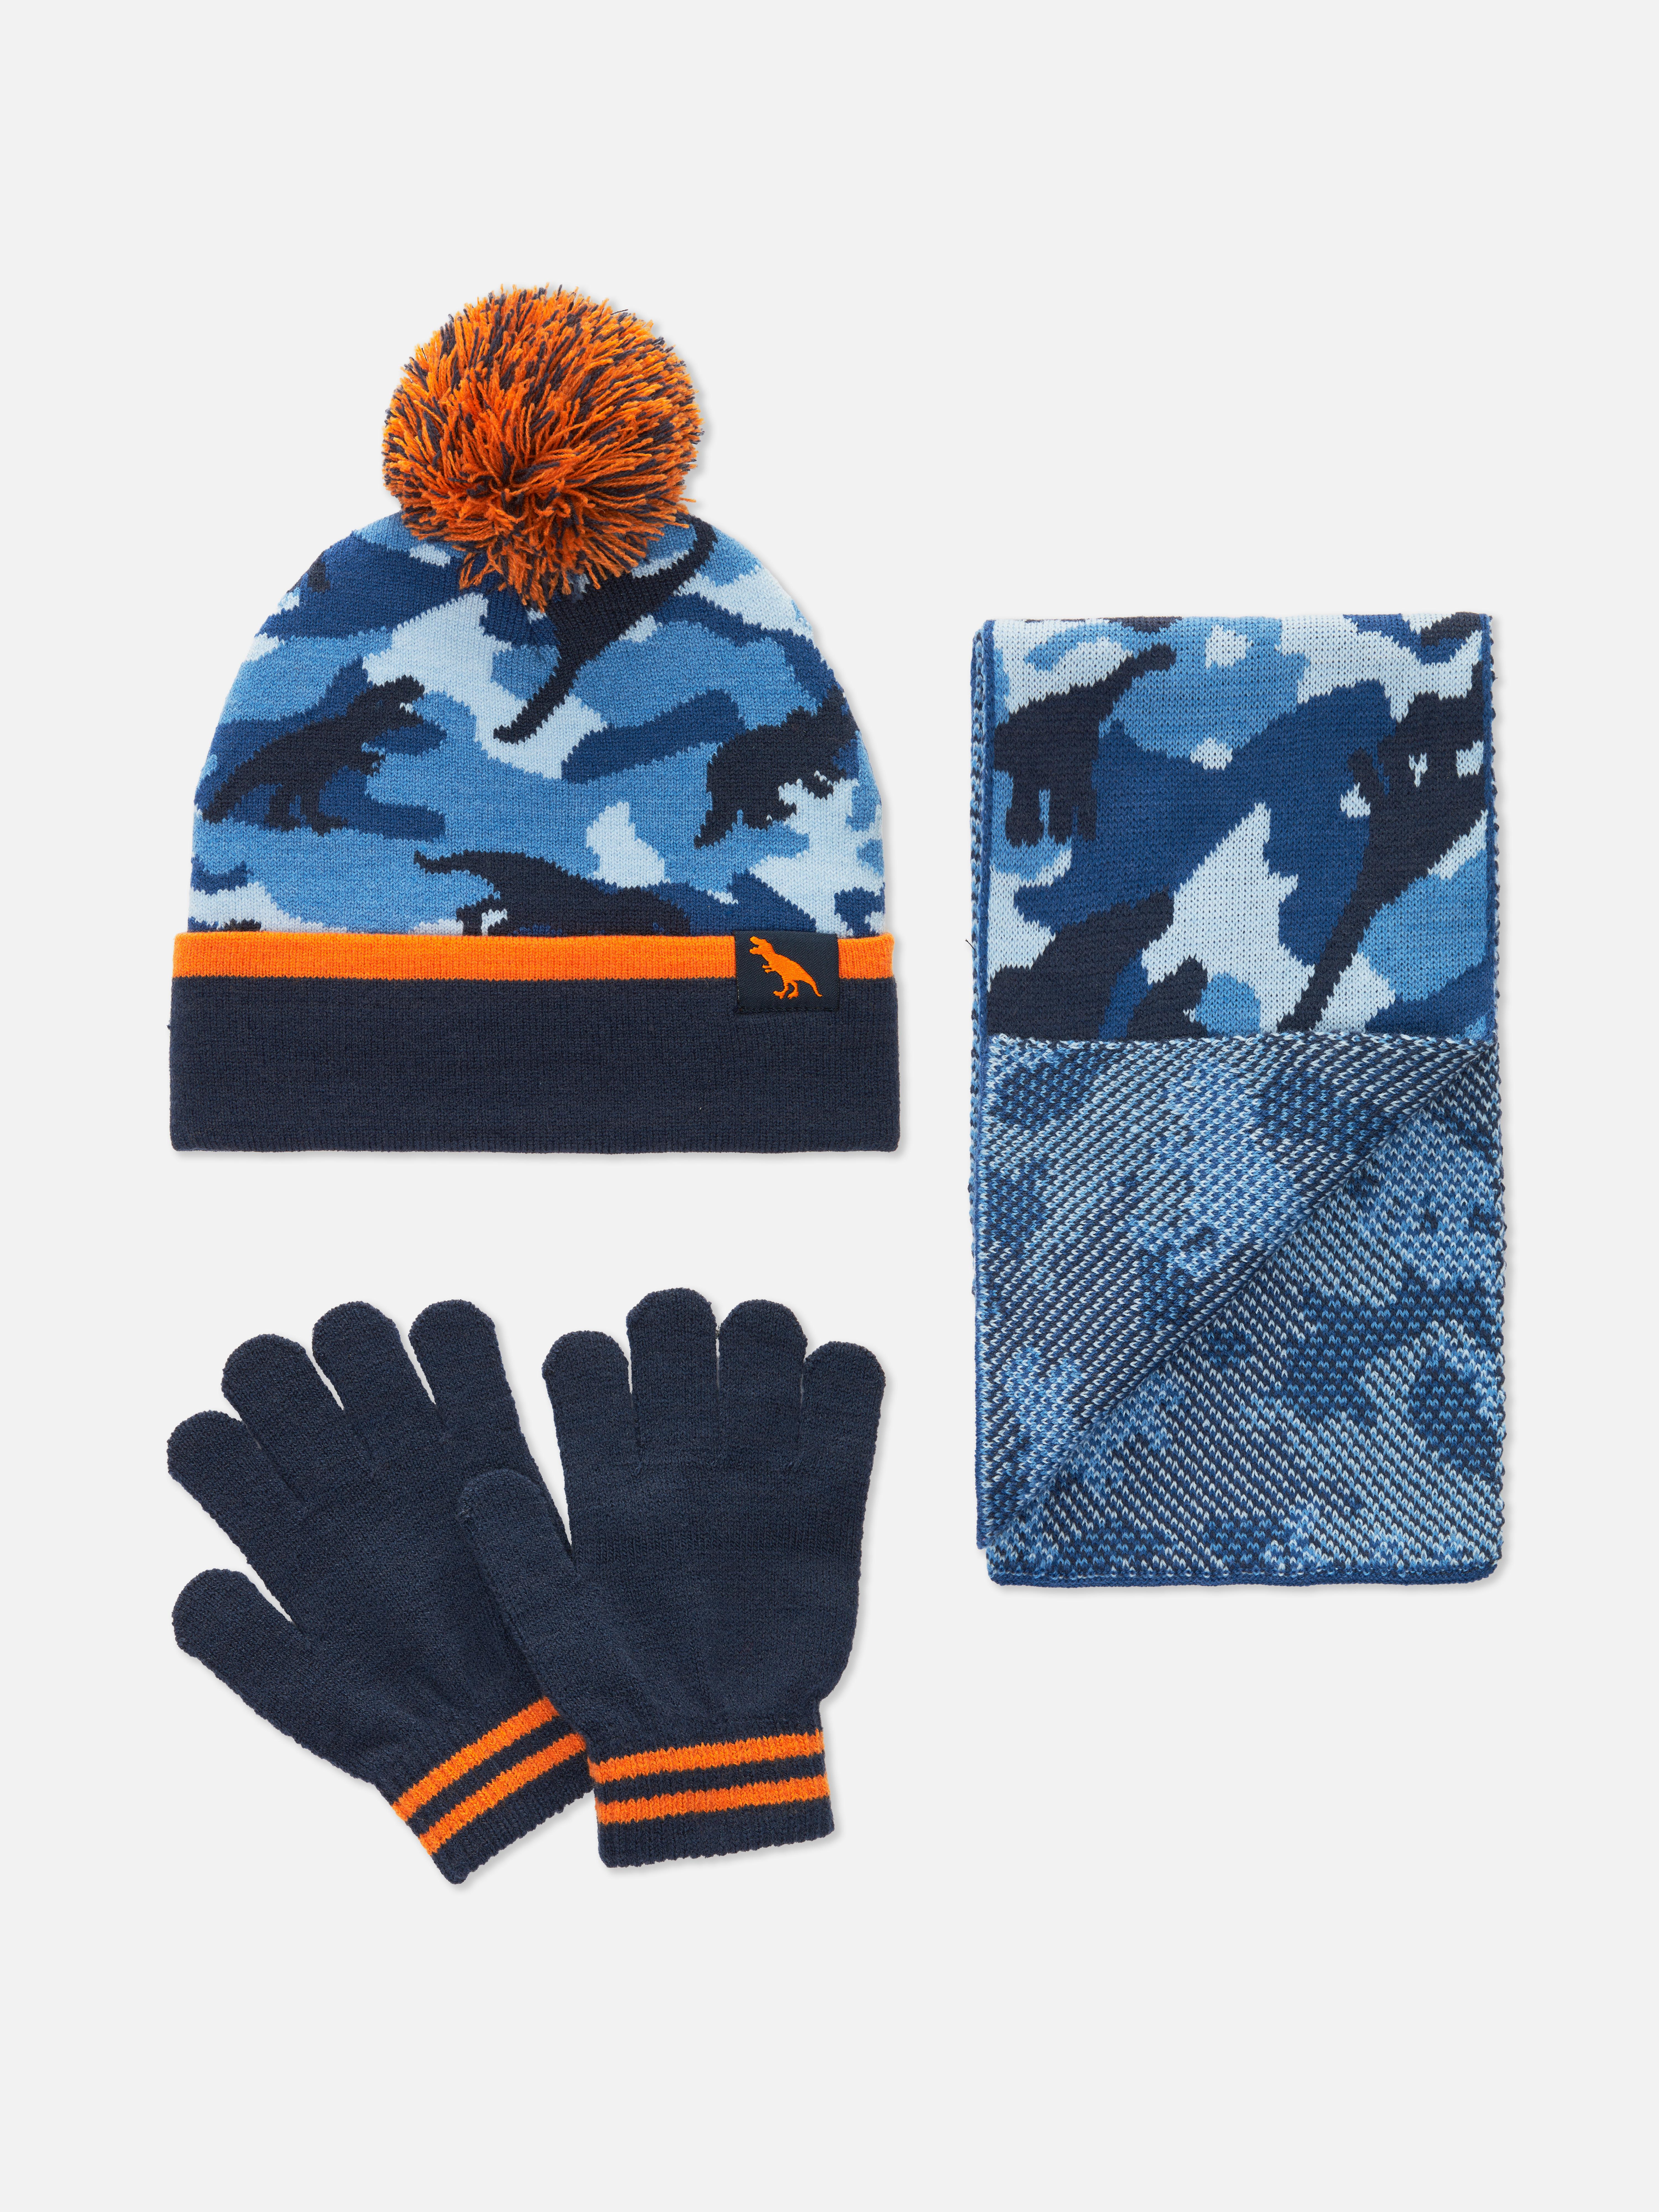 Knitted Winter Accessories Set